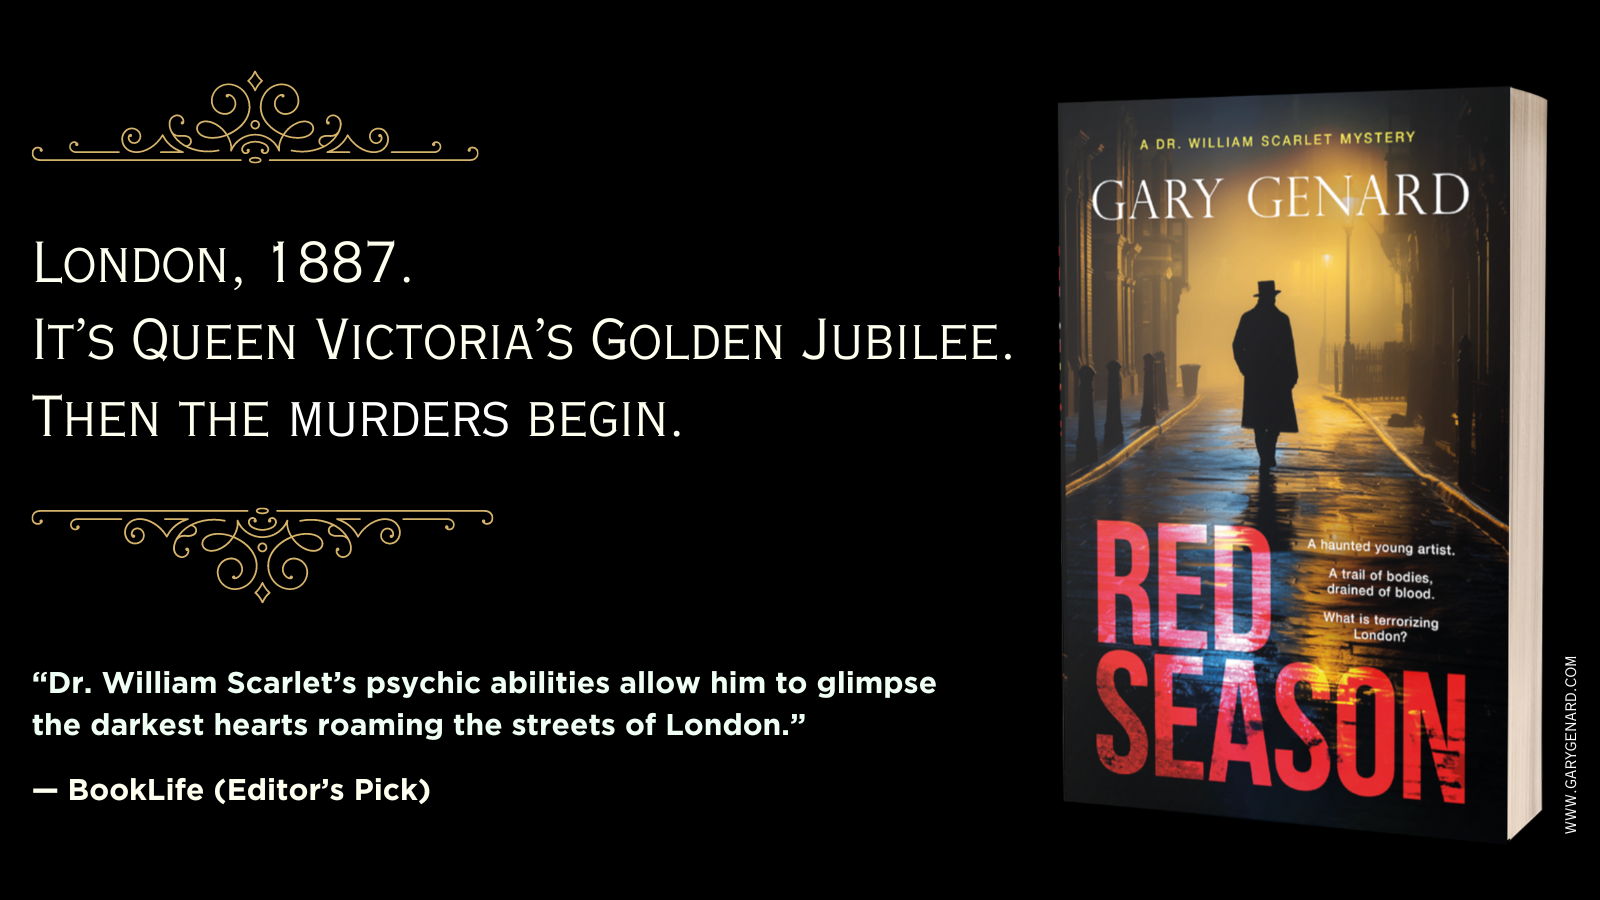 Red Season, an historical thriller featuring a psychic detective and a serial killer, by Gary Genard.